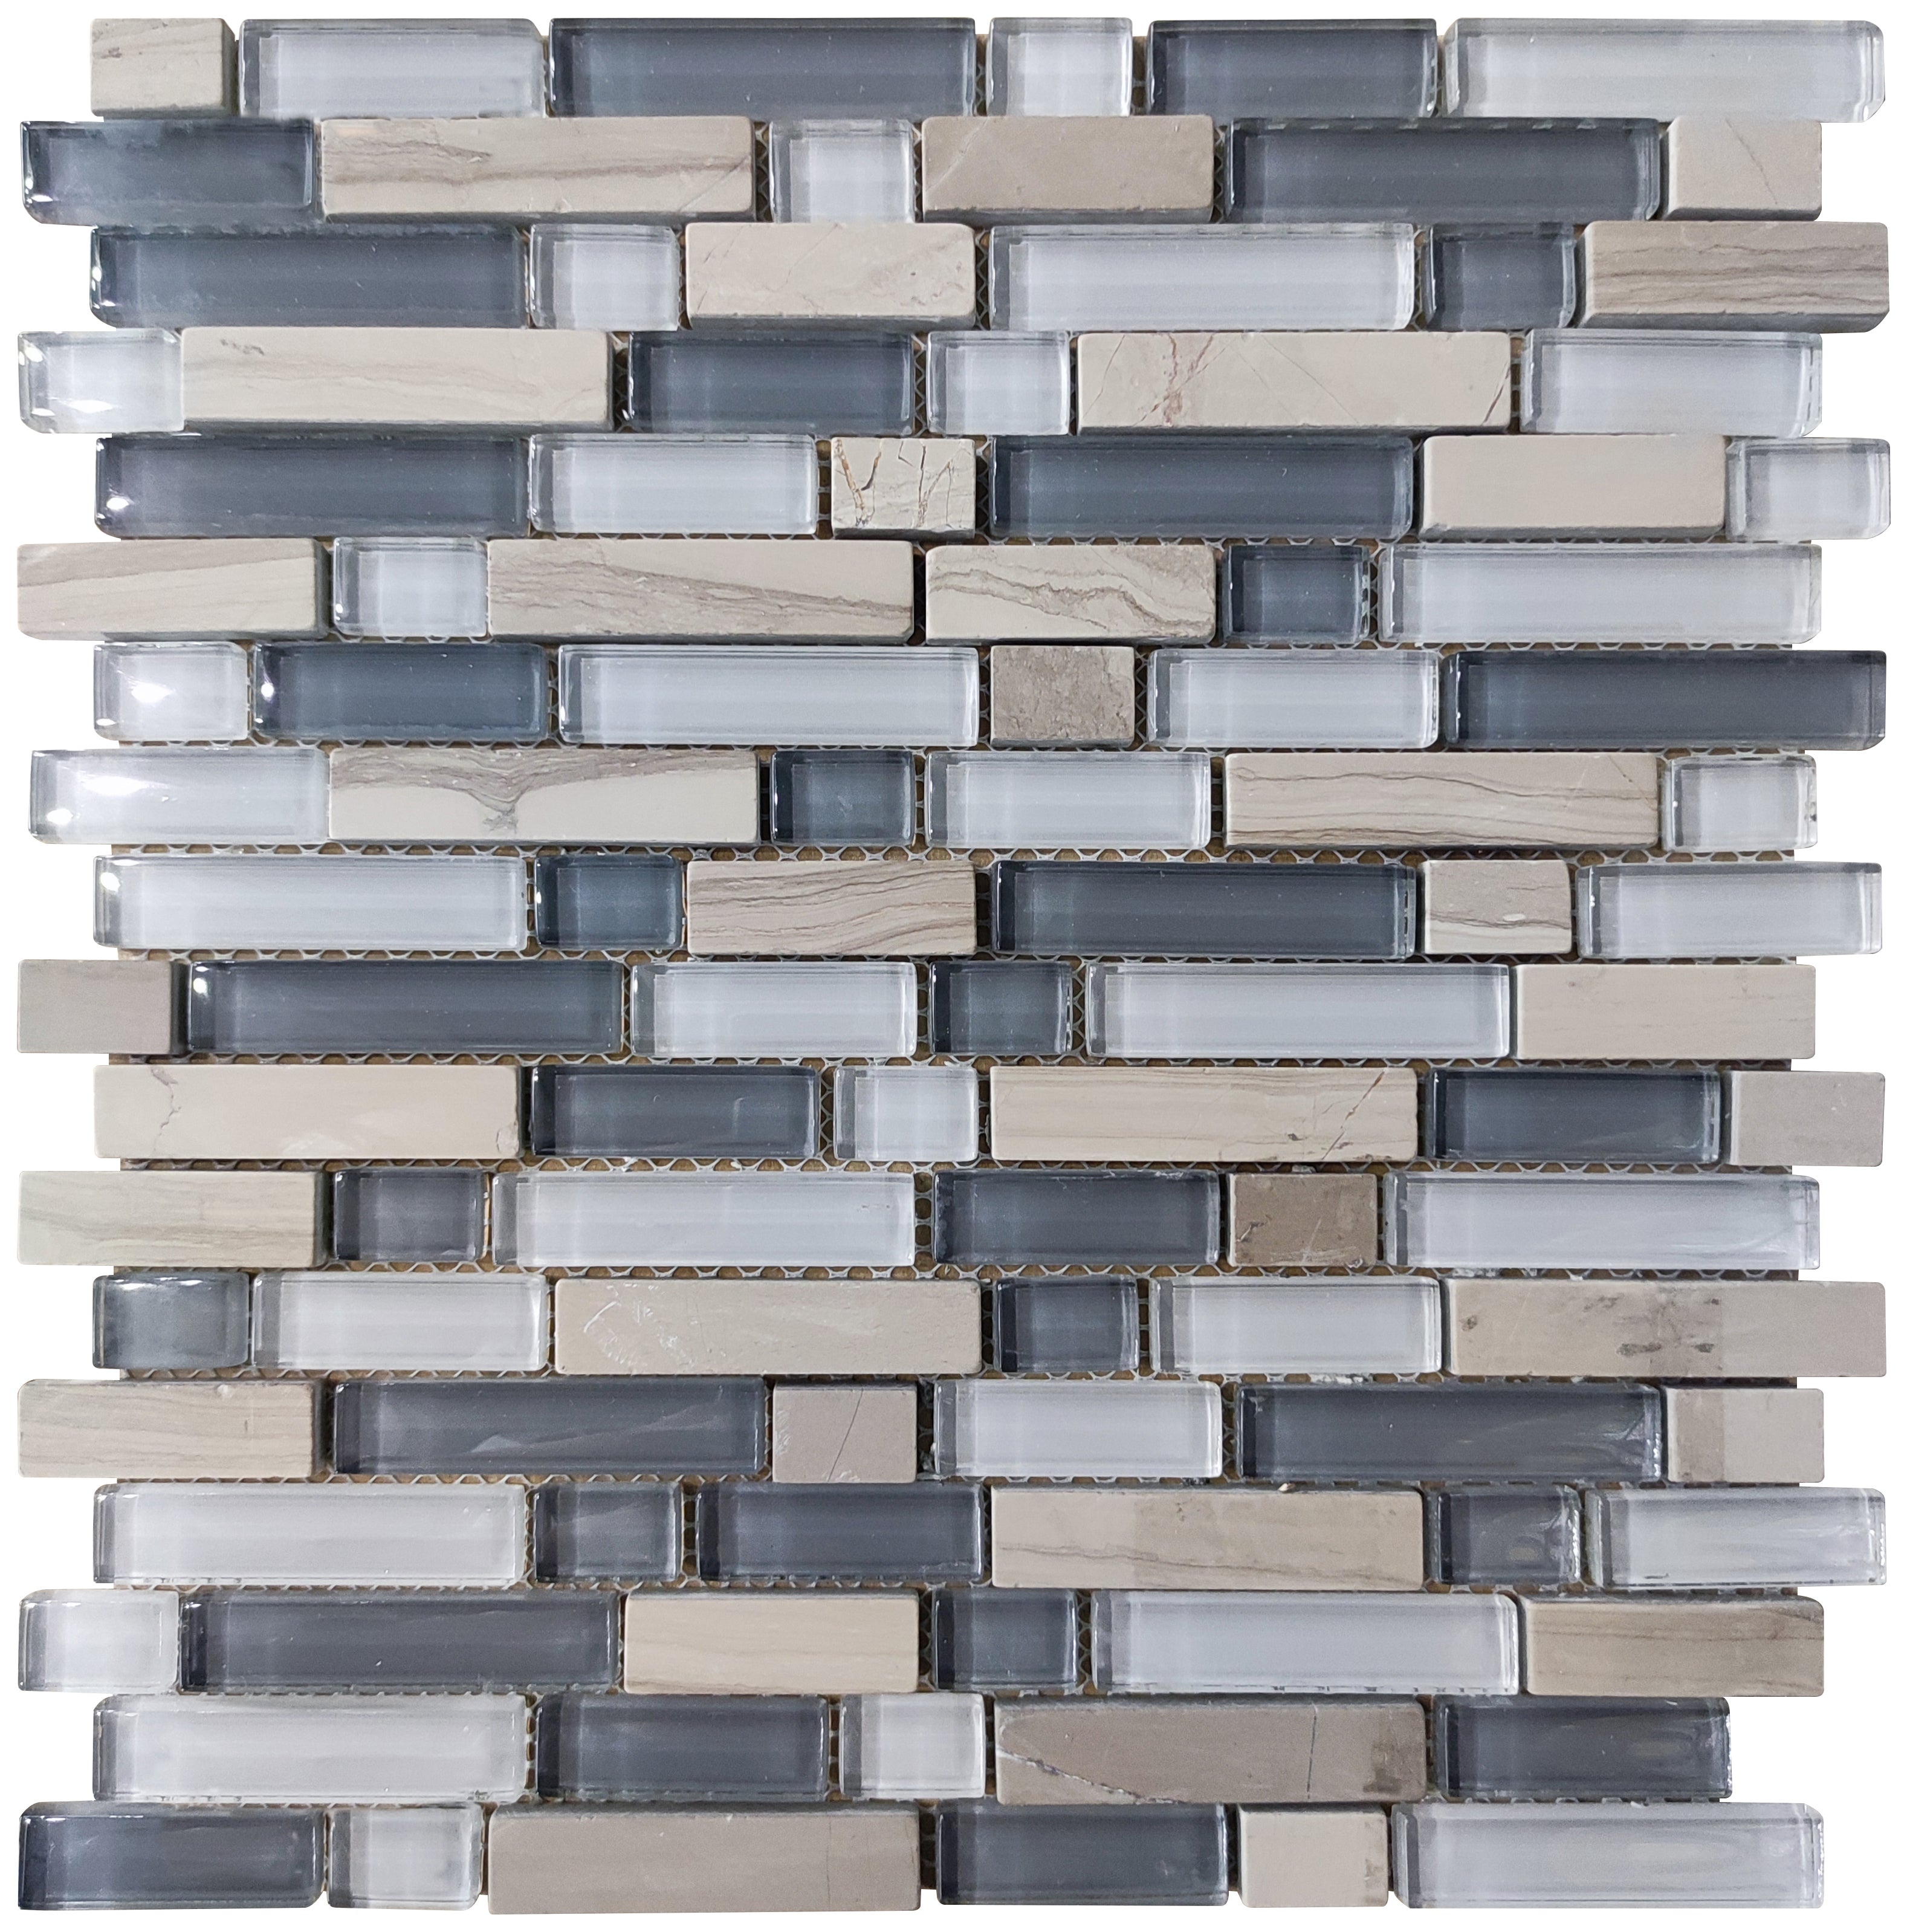 12 x 12 in Mosaic Tile with Grey Color and Glossy Finish